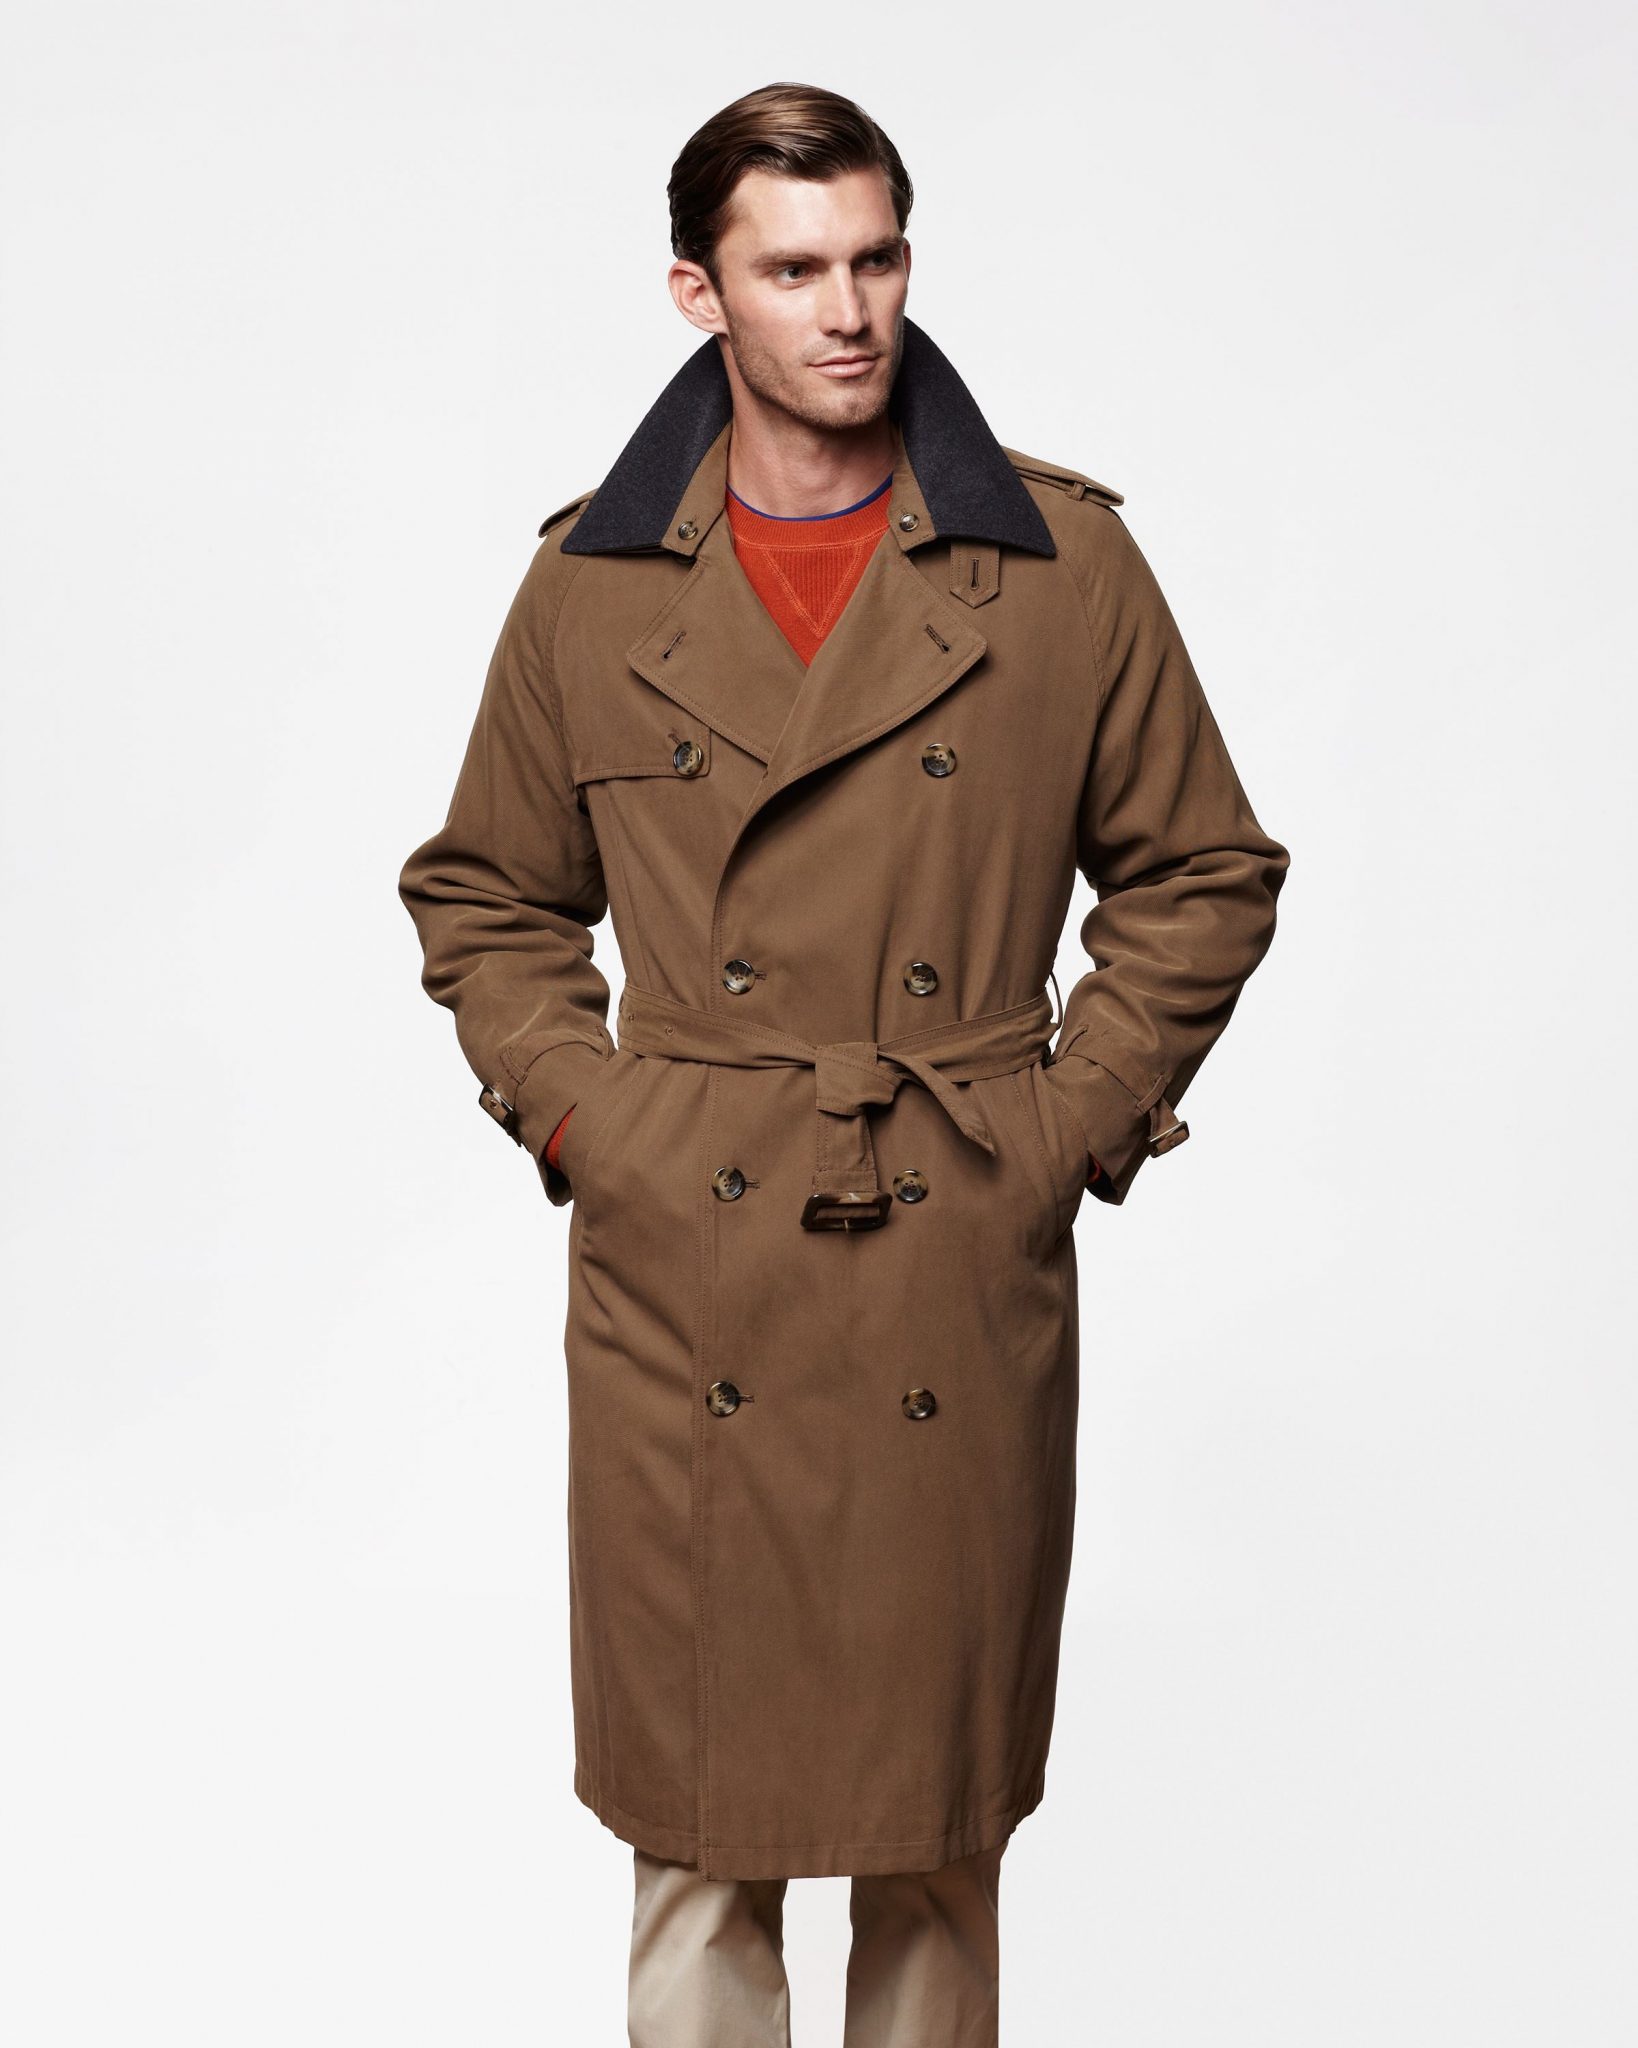 Trench Coat for Men Outfit Ideas – careyfashion.com